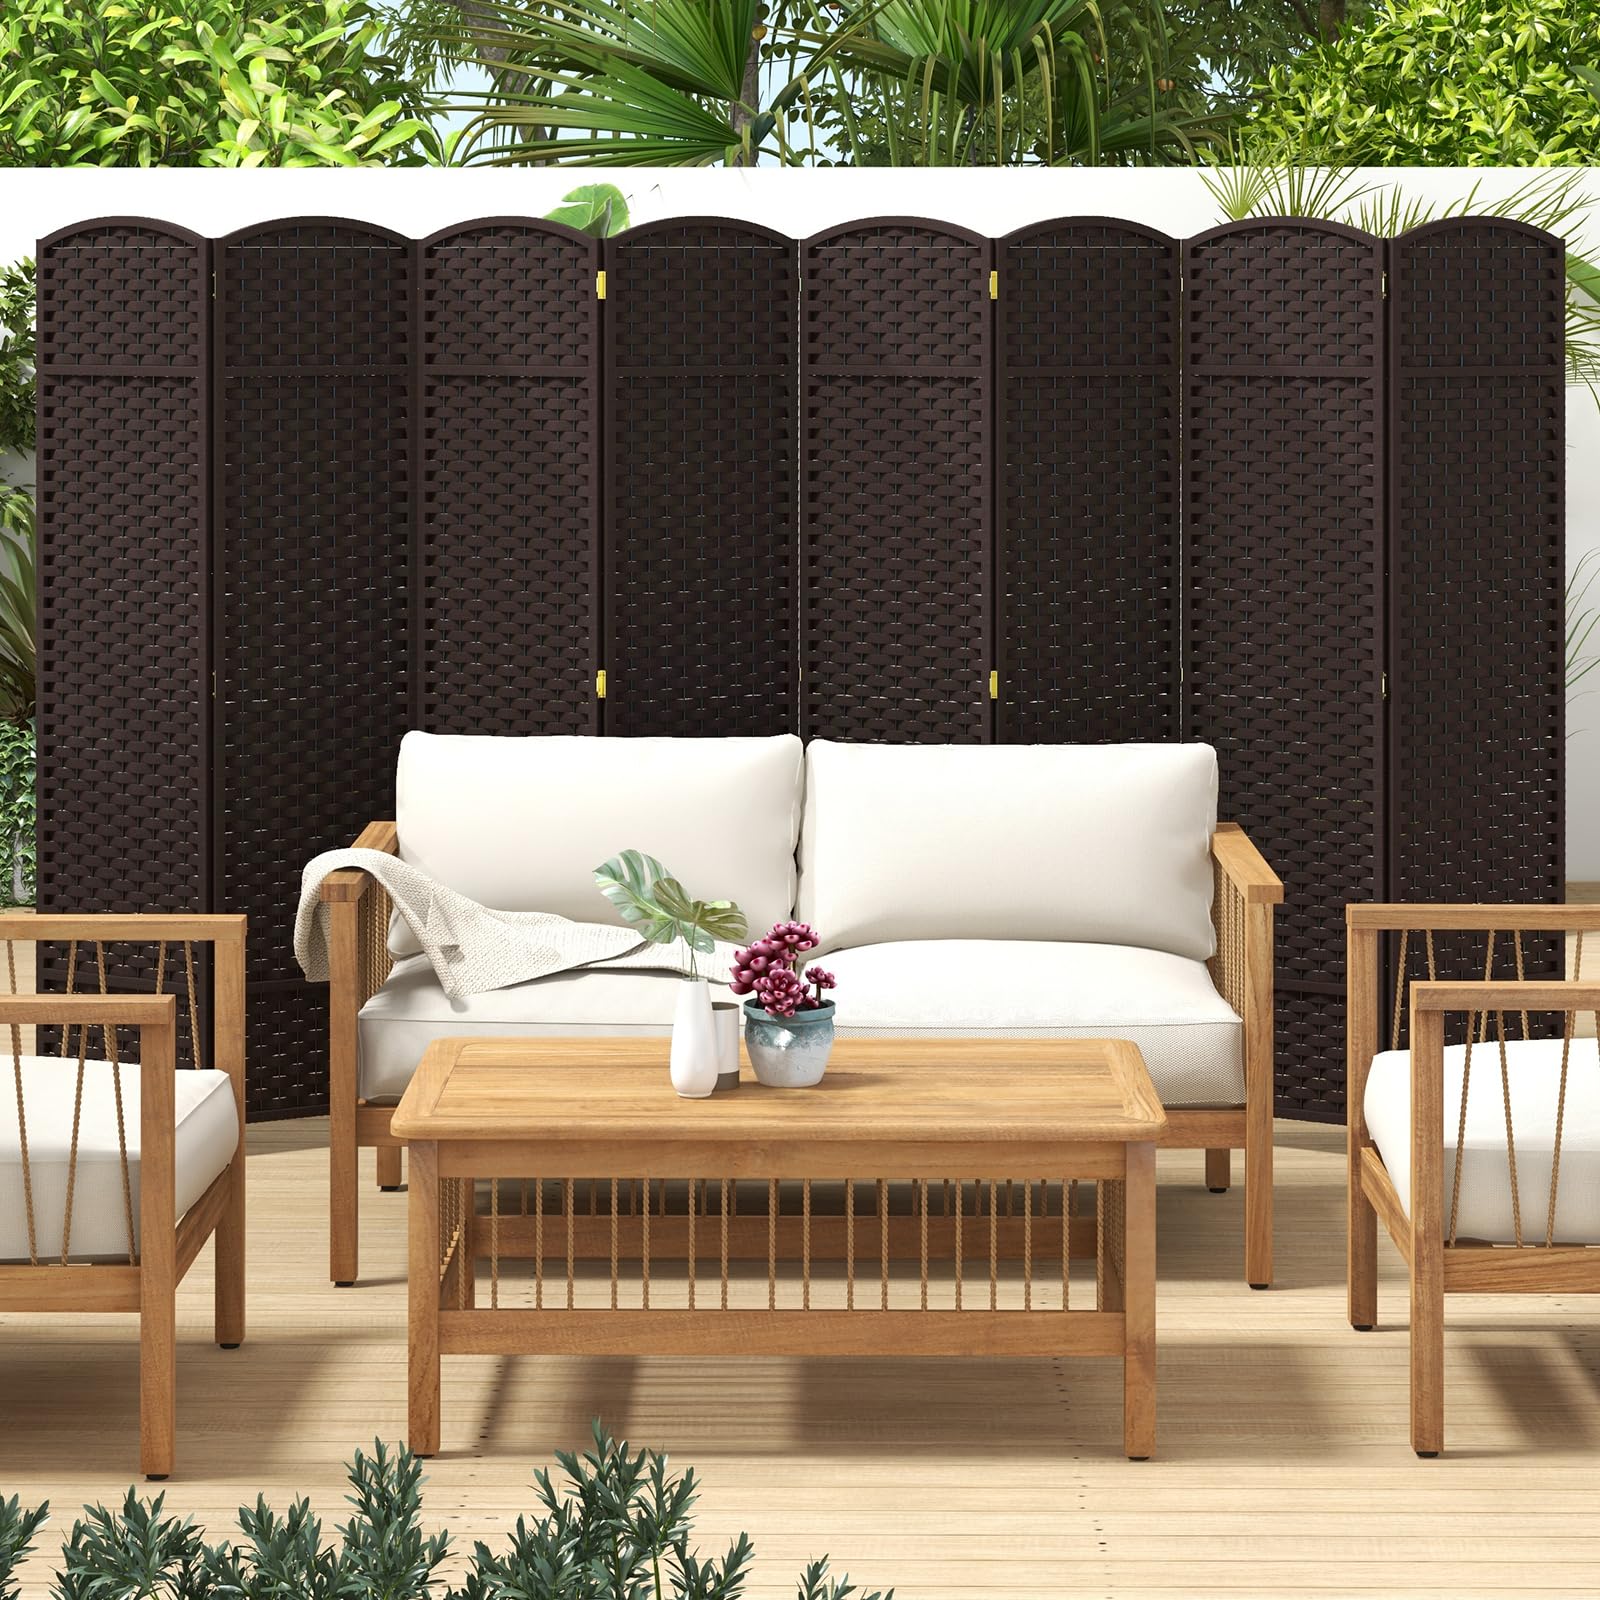 Giantex Room Divider 8 Panel, 5.6ft Folding Privacy Screen